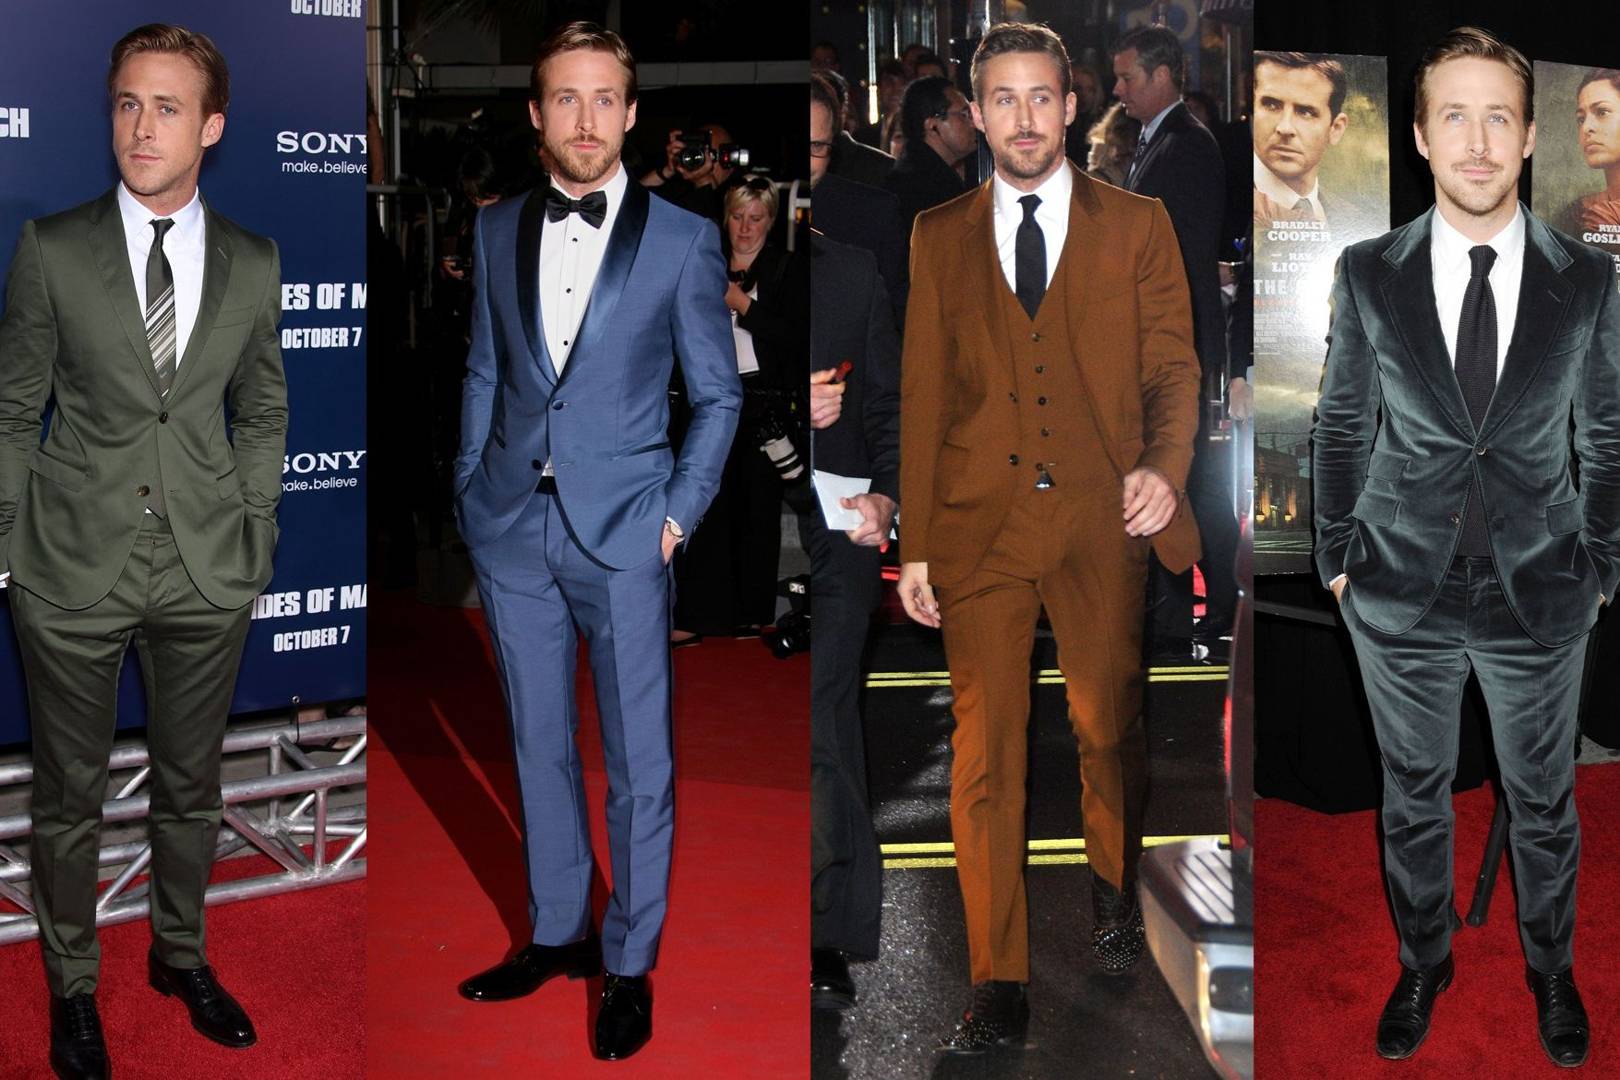 Style File: Ryan Gosling's best outfits in pictures | British GQ